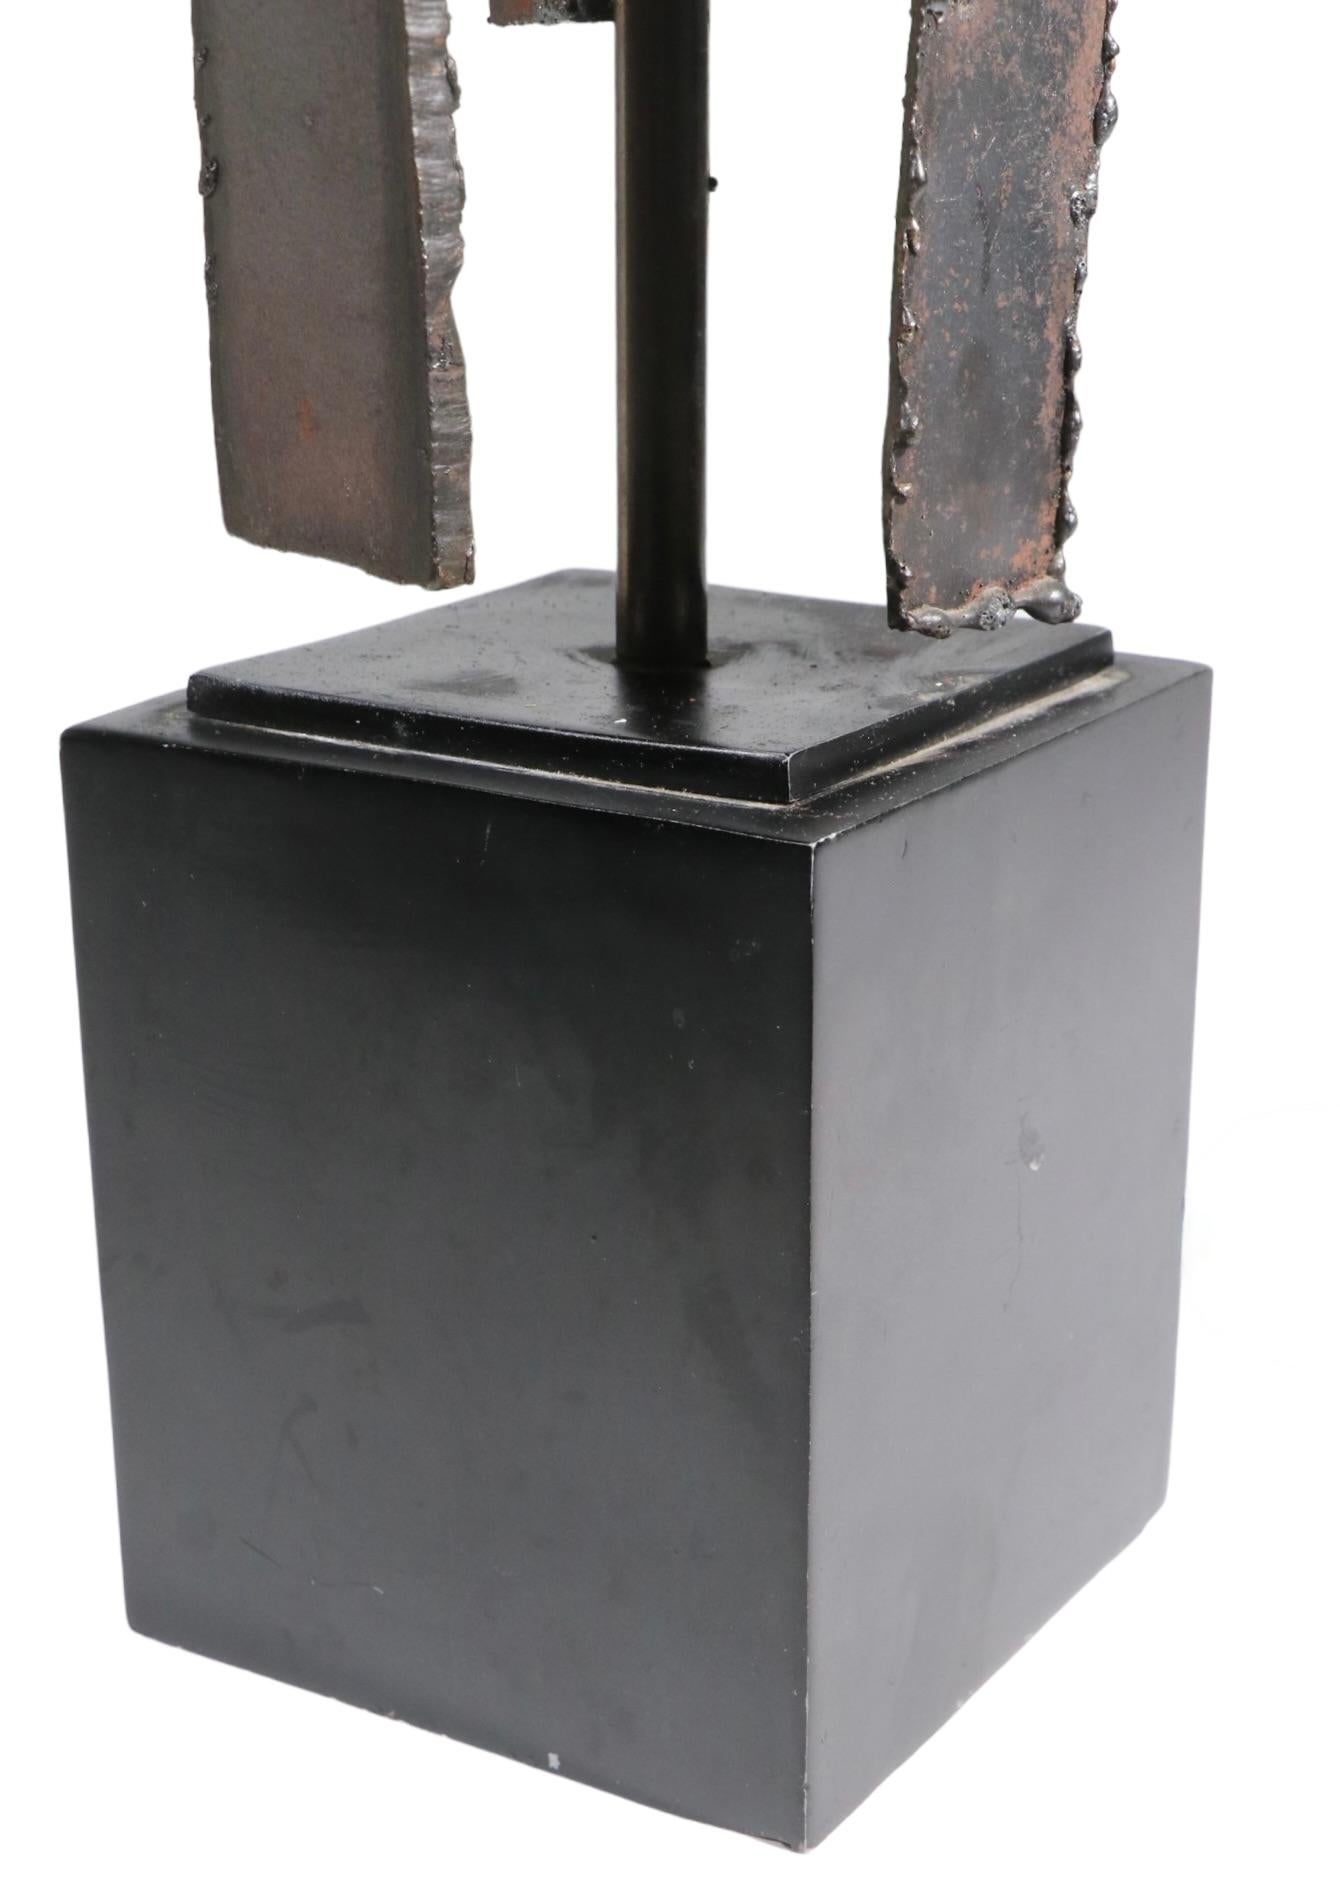 Iconic Brutalist table lamp, by Harry Blamer, for the Laurel Lamp Company circa 1970's. The lamp features a torch cut body of welded iron segments, mounted on a rectangular plinth base. This example is in very good, original, clean and working